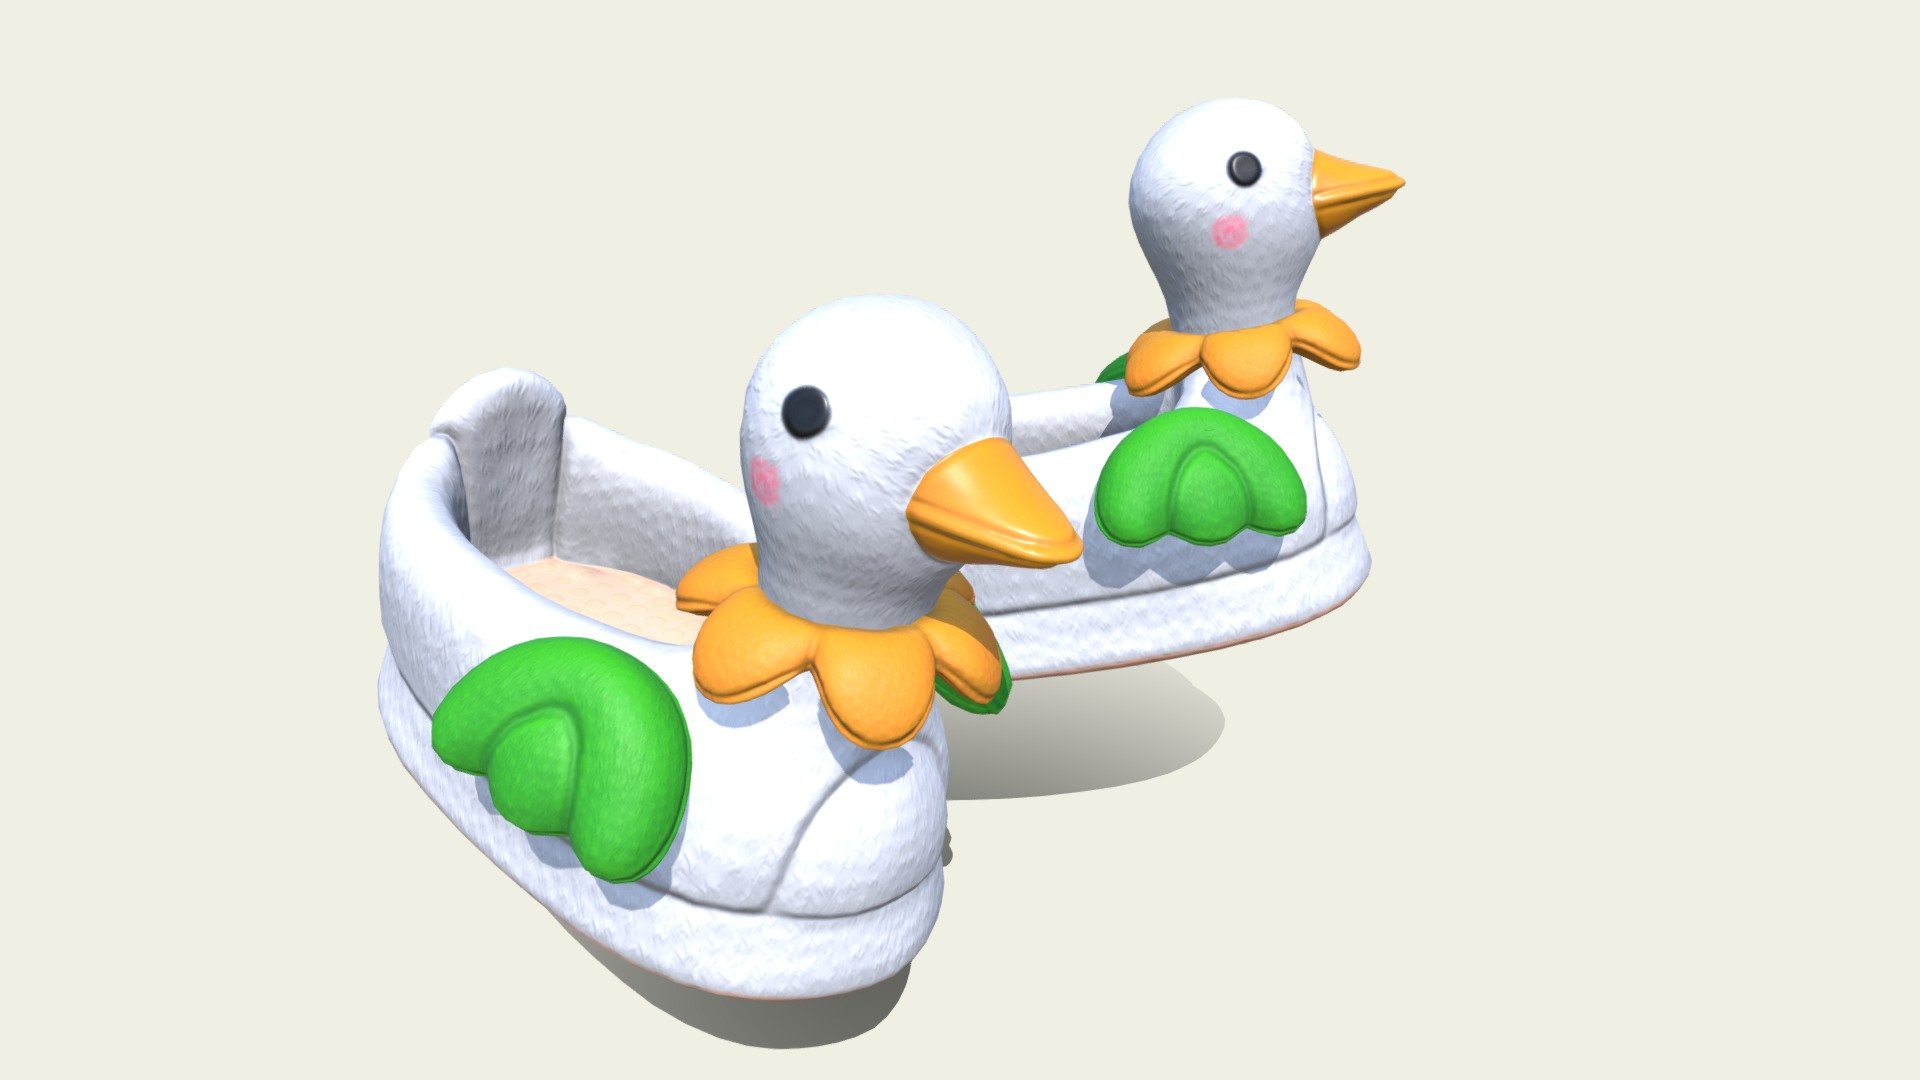 Welcome

This is the presentation of my work. The model witch you can see is made as a low poly, stylized and textured asset.

This asset pack contains:

Duck Shoes.

Technical information:

Texture - 2048 x 2048

One Duck Shoe - 8266 tris, 4133 faces, 4150 verts.

Contact details:

lukas.boban123@gmail.com

https://www.facebook.com/lukas.boban/

Thank you for taking look please consider leave like 3d model